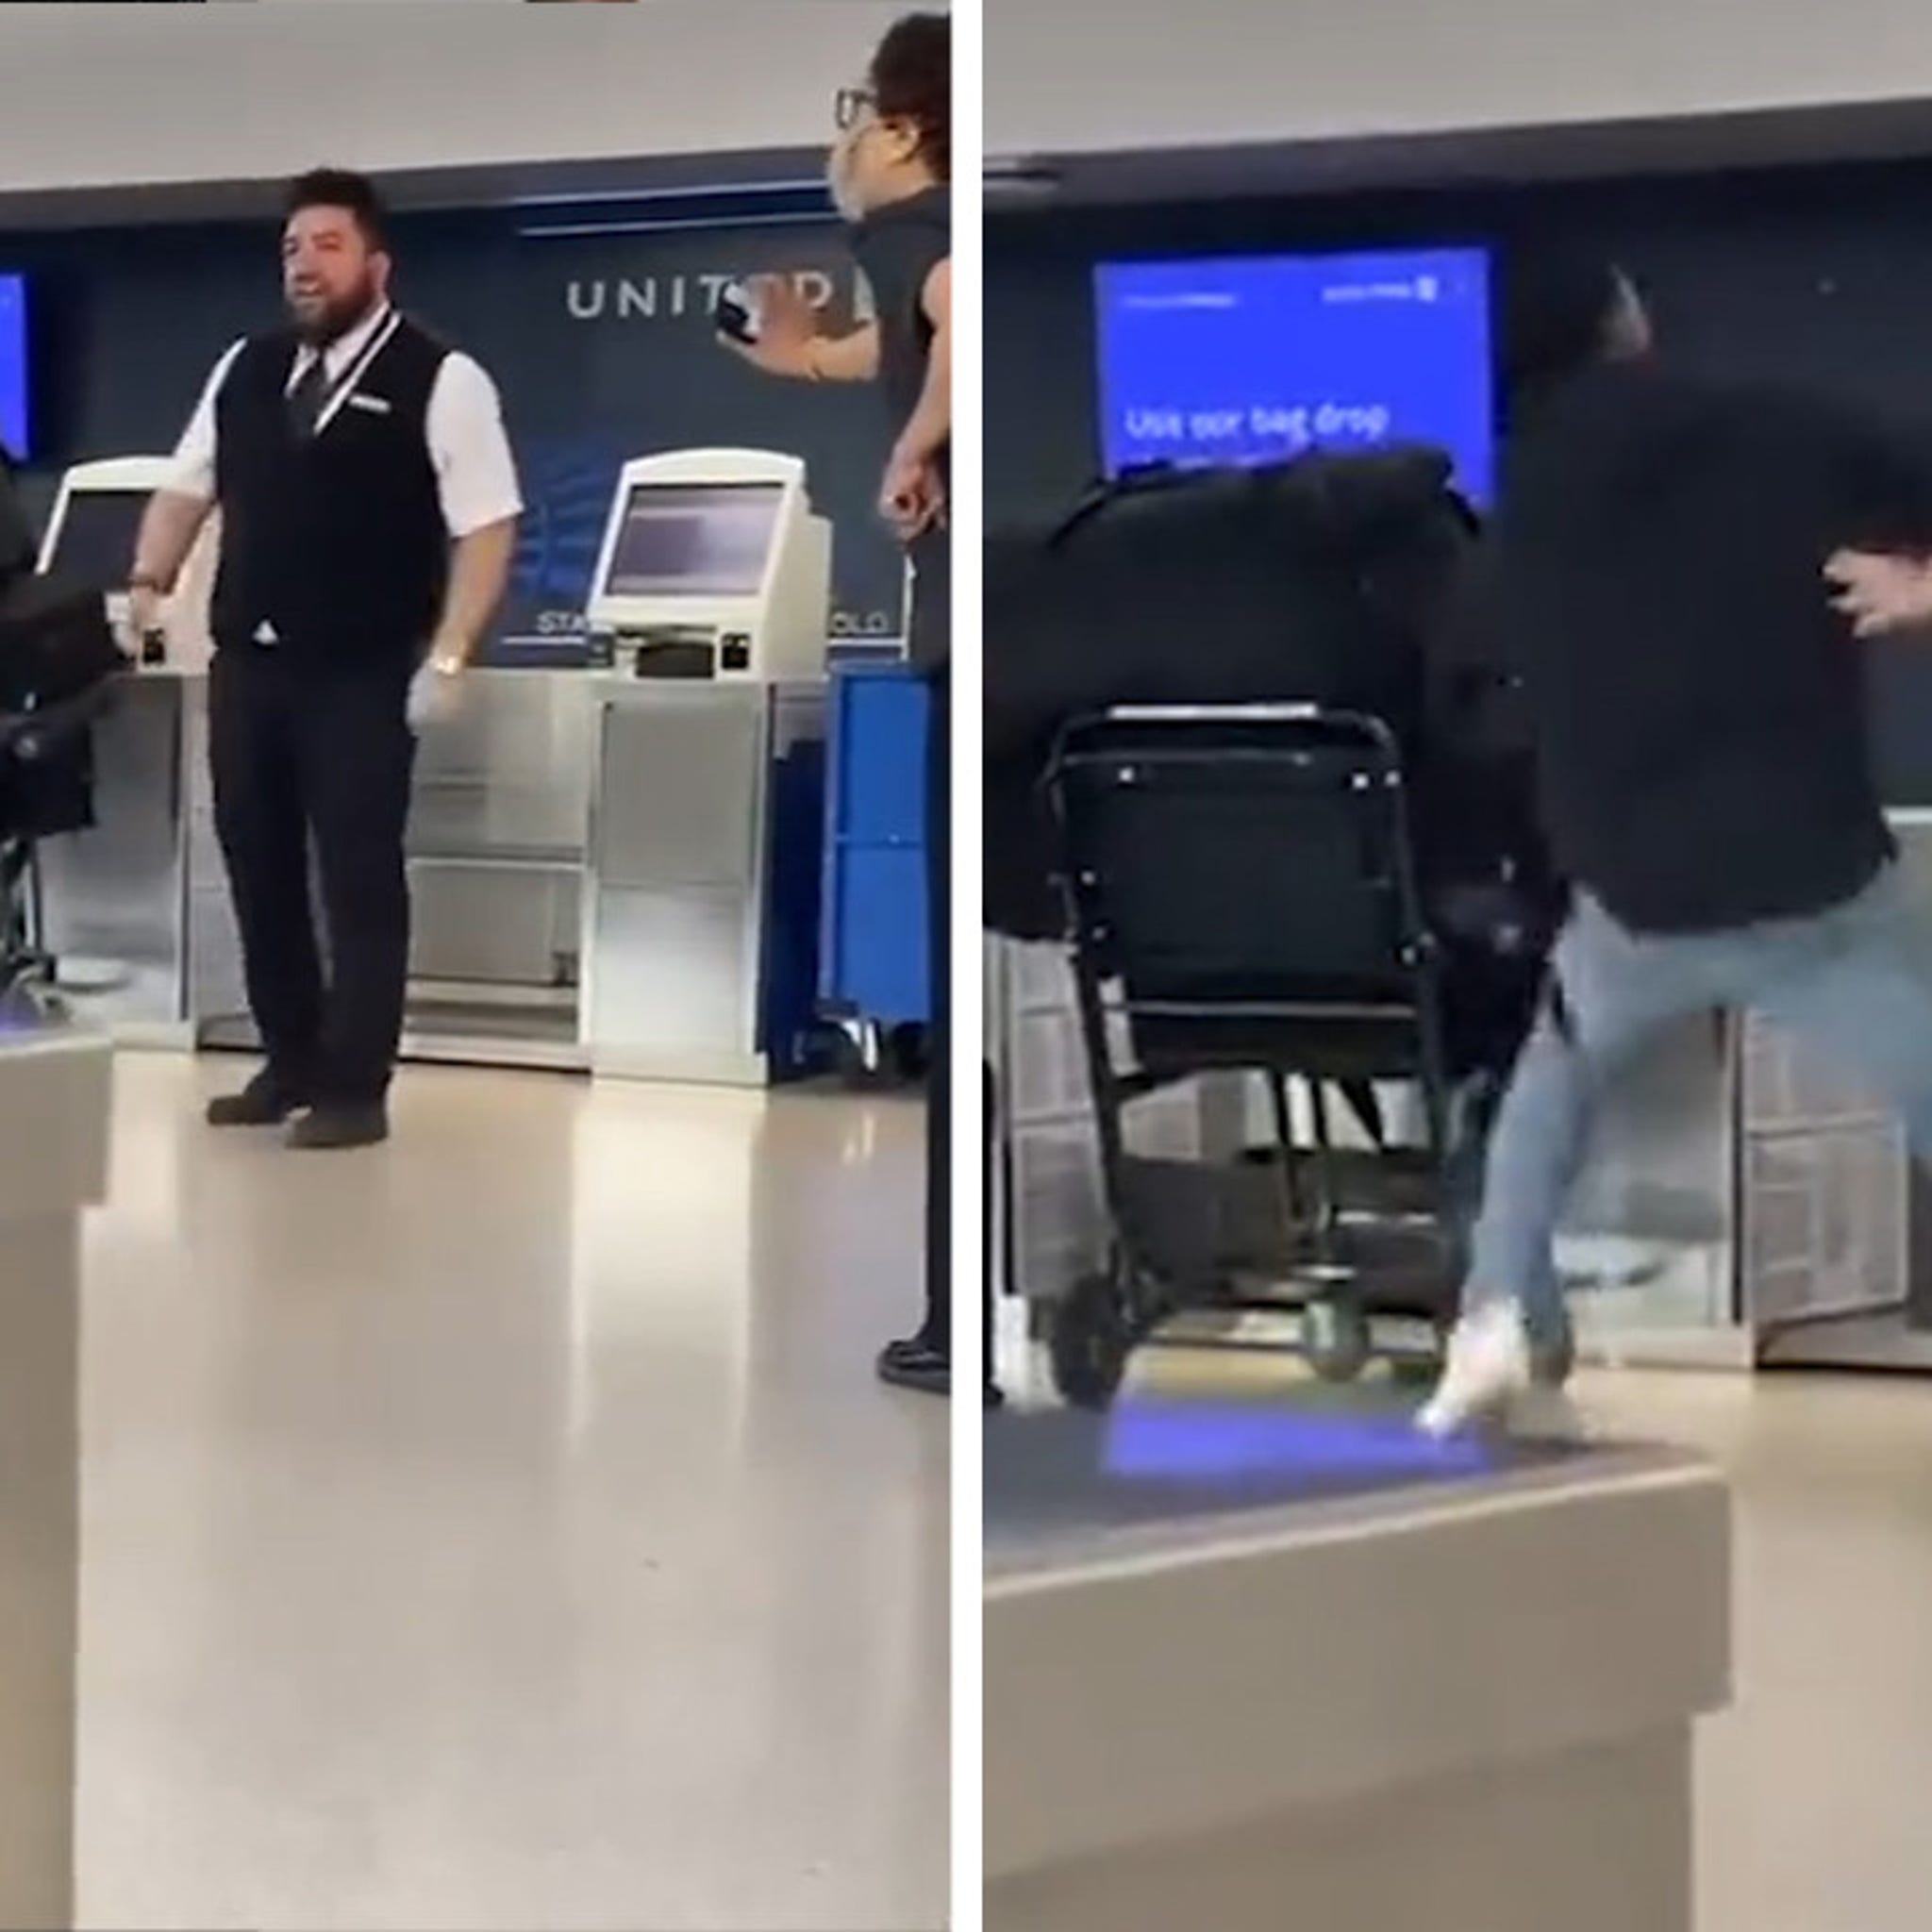 Video shows Ex-Broncos WR in fistfight with airport worker